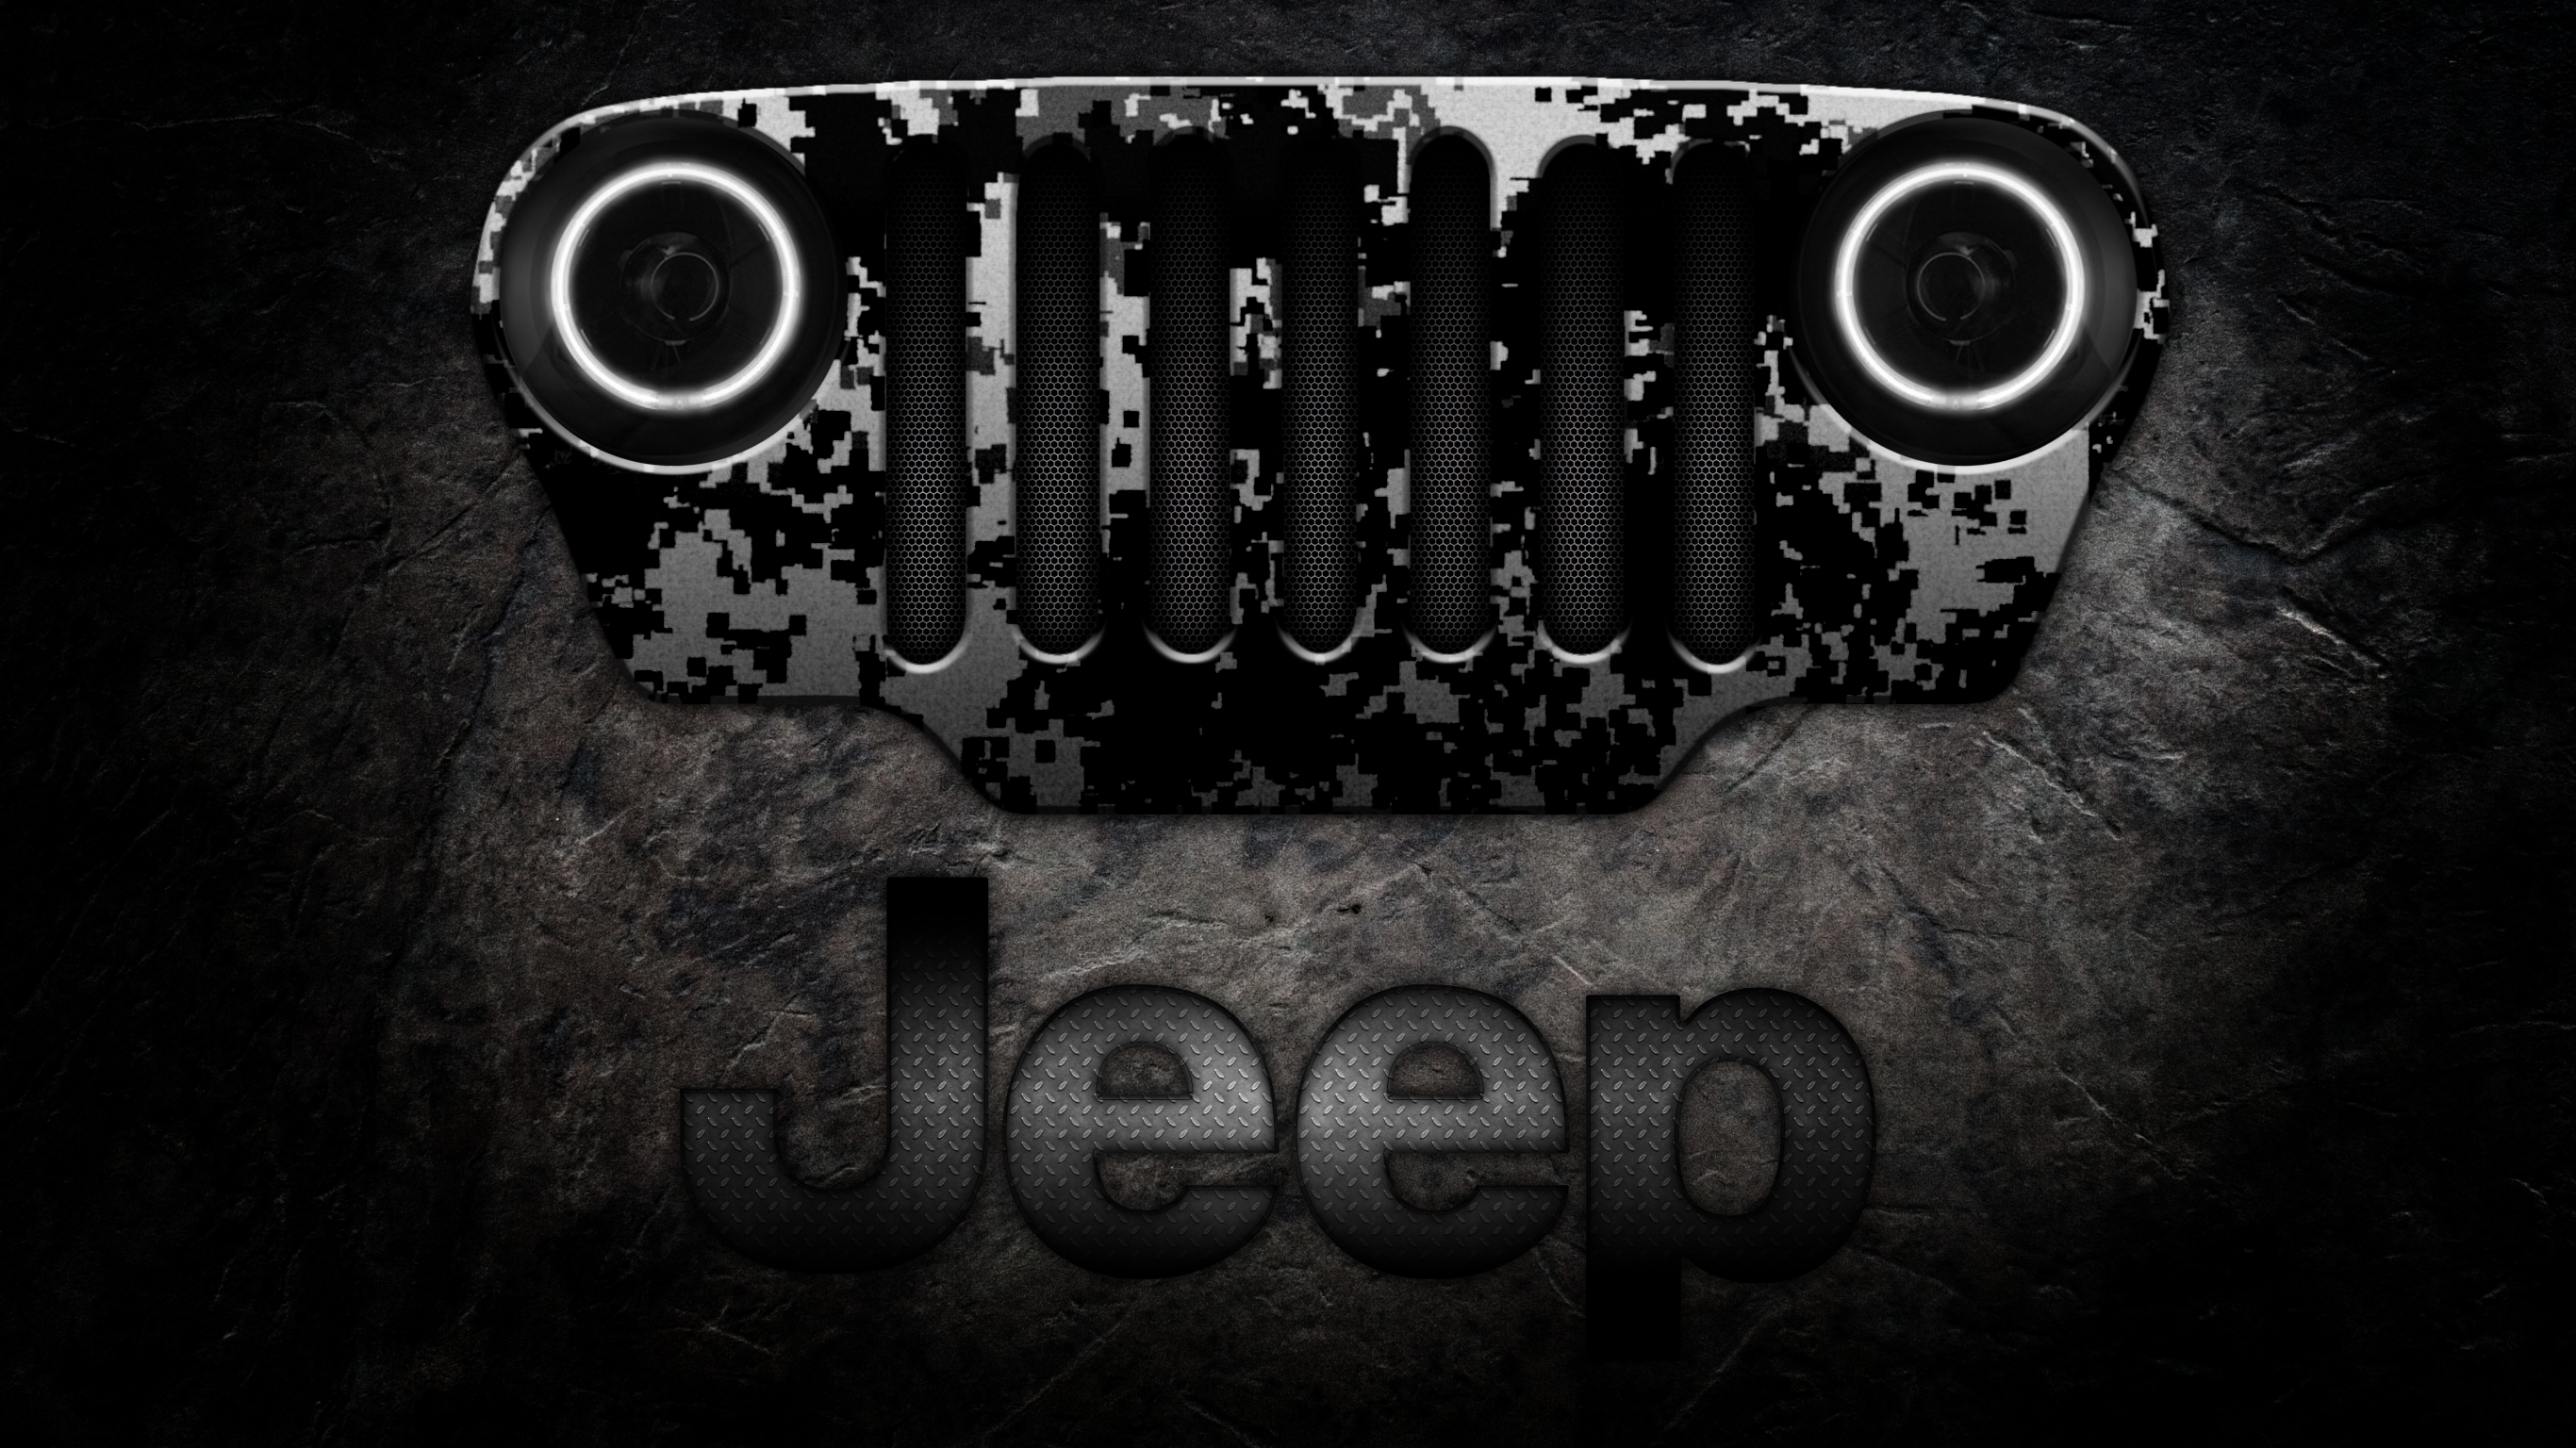 Jeep iPhone Wallpaper And Up For Grabs